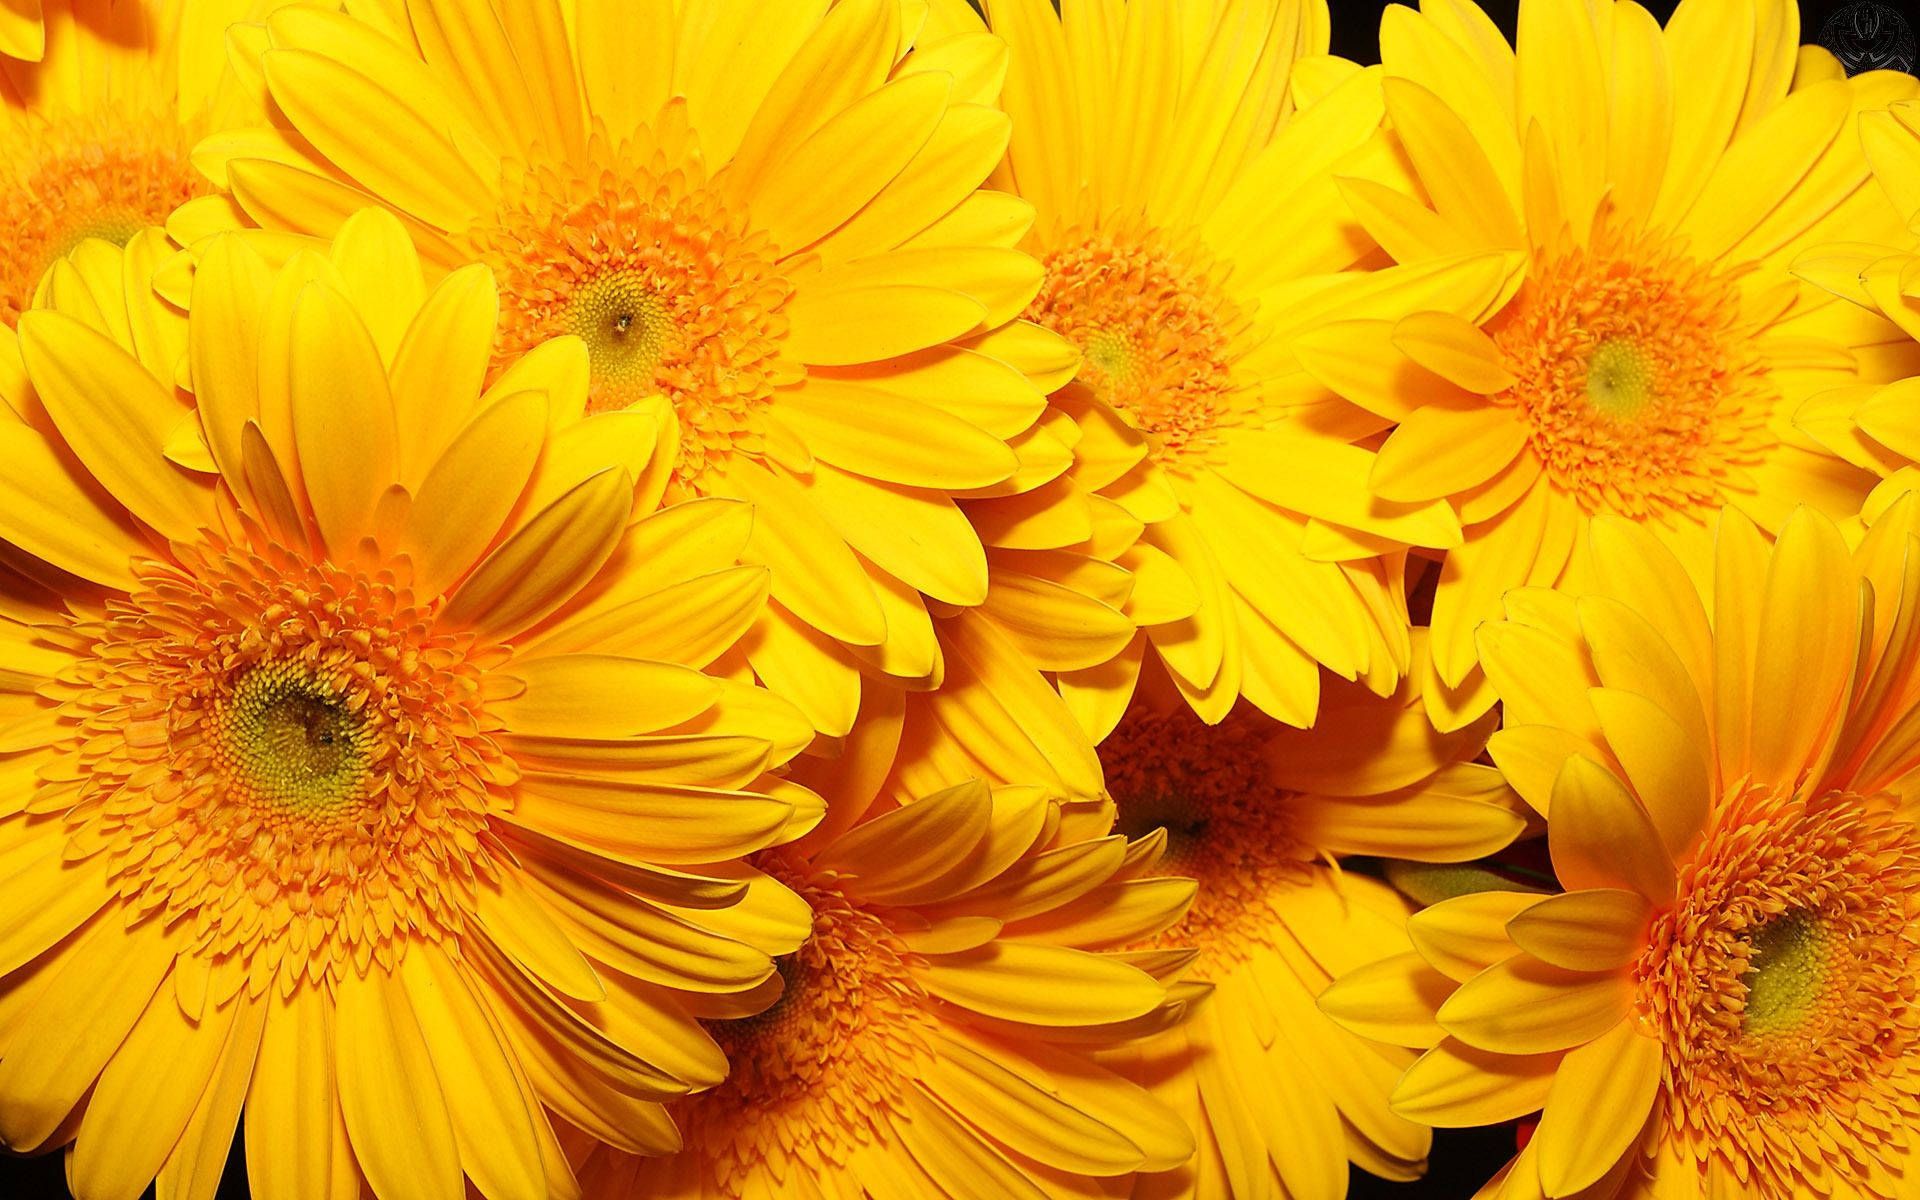 A close up of some yellow flowers - Beautiful